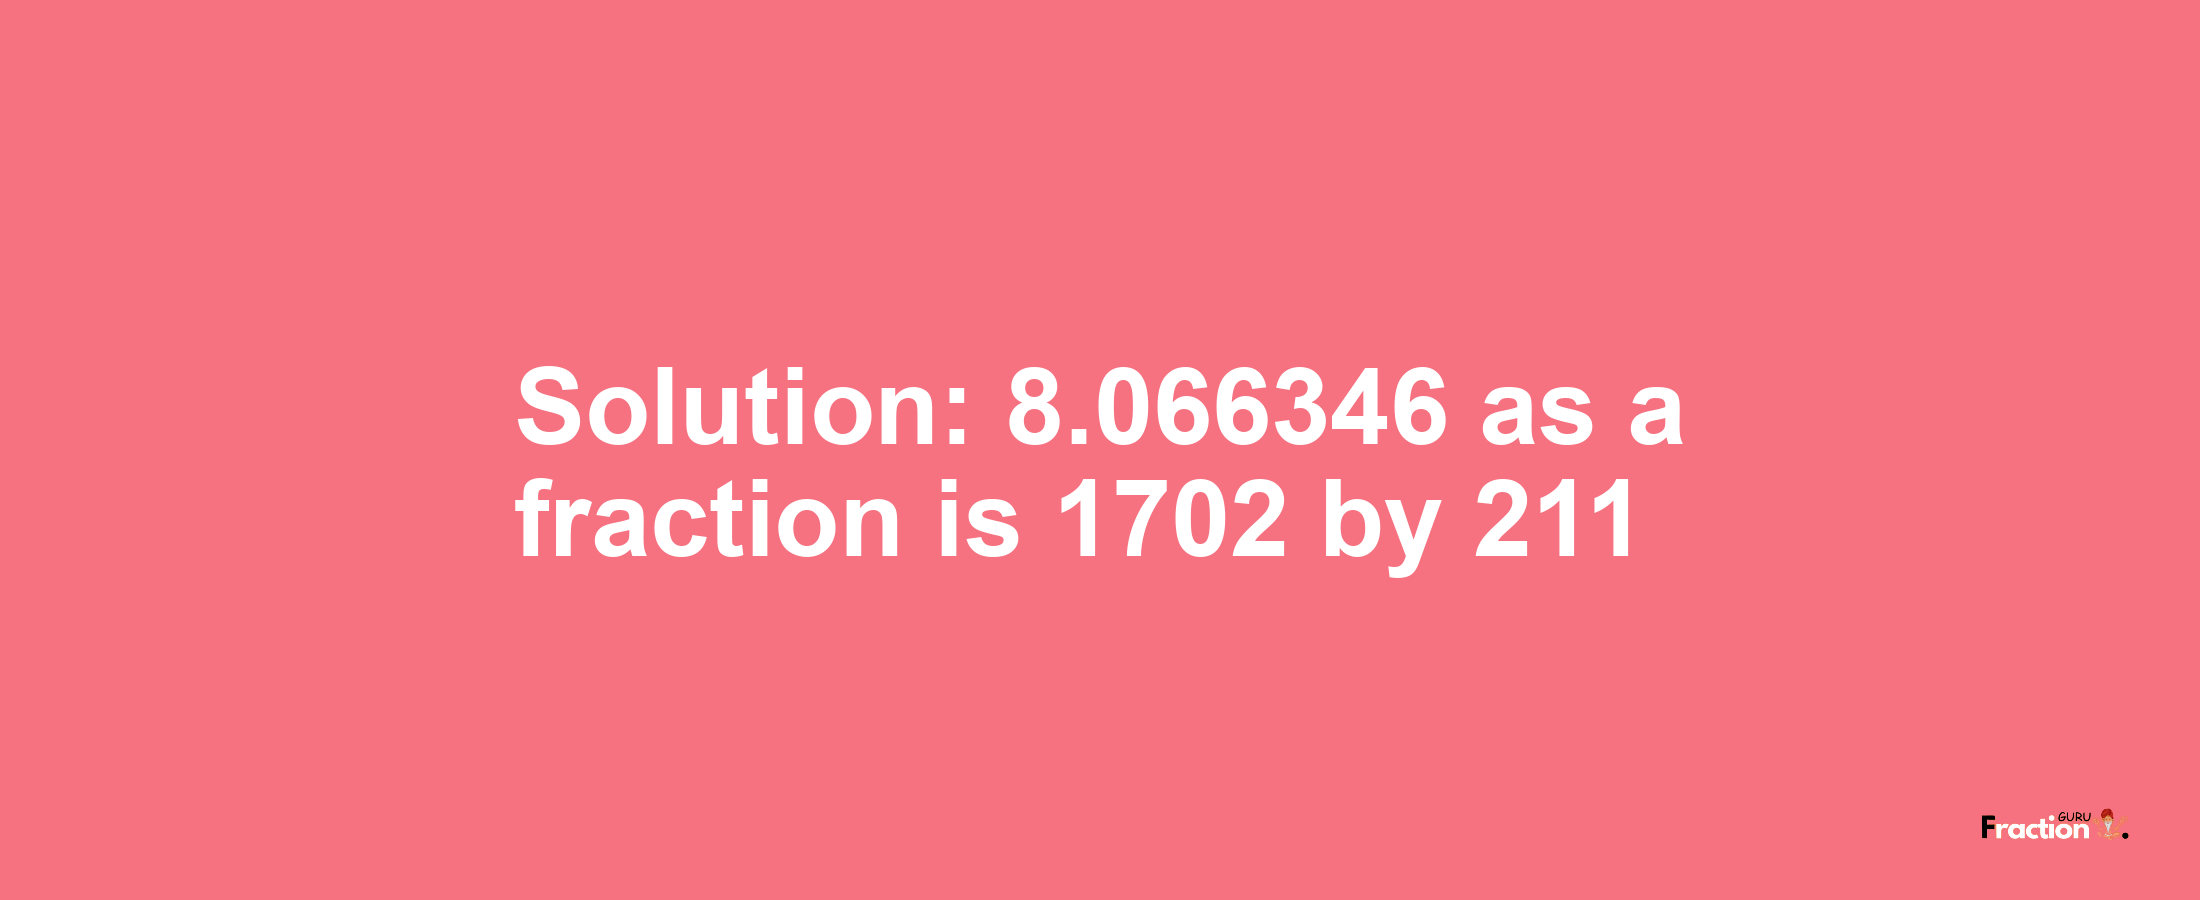 Solution:8.066346 as a fraction is 1702/211